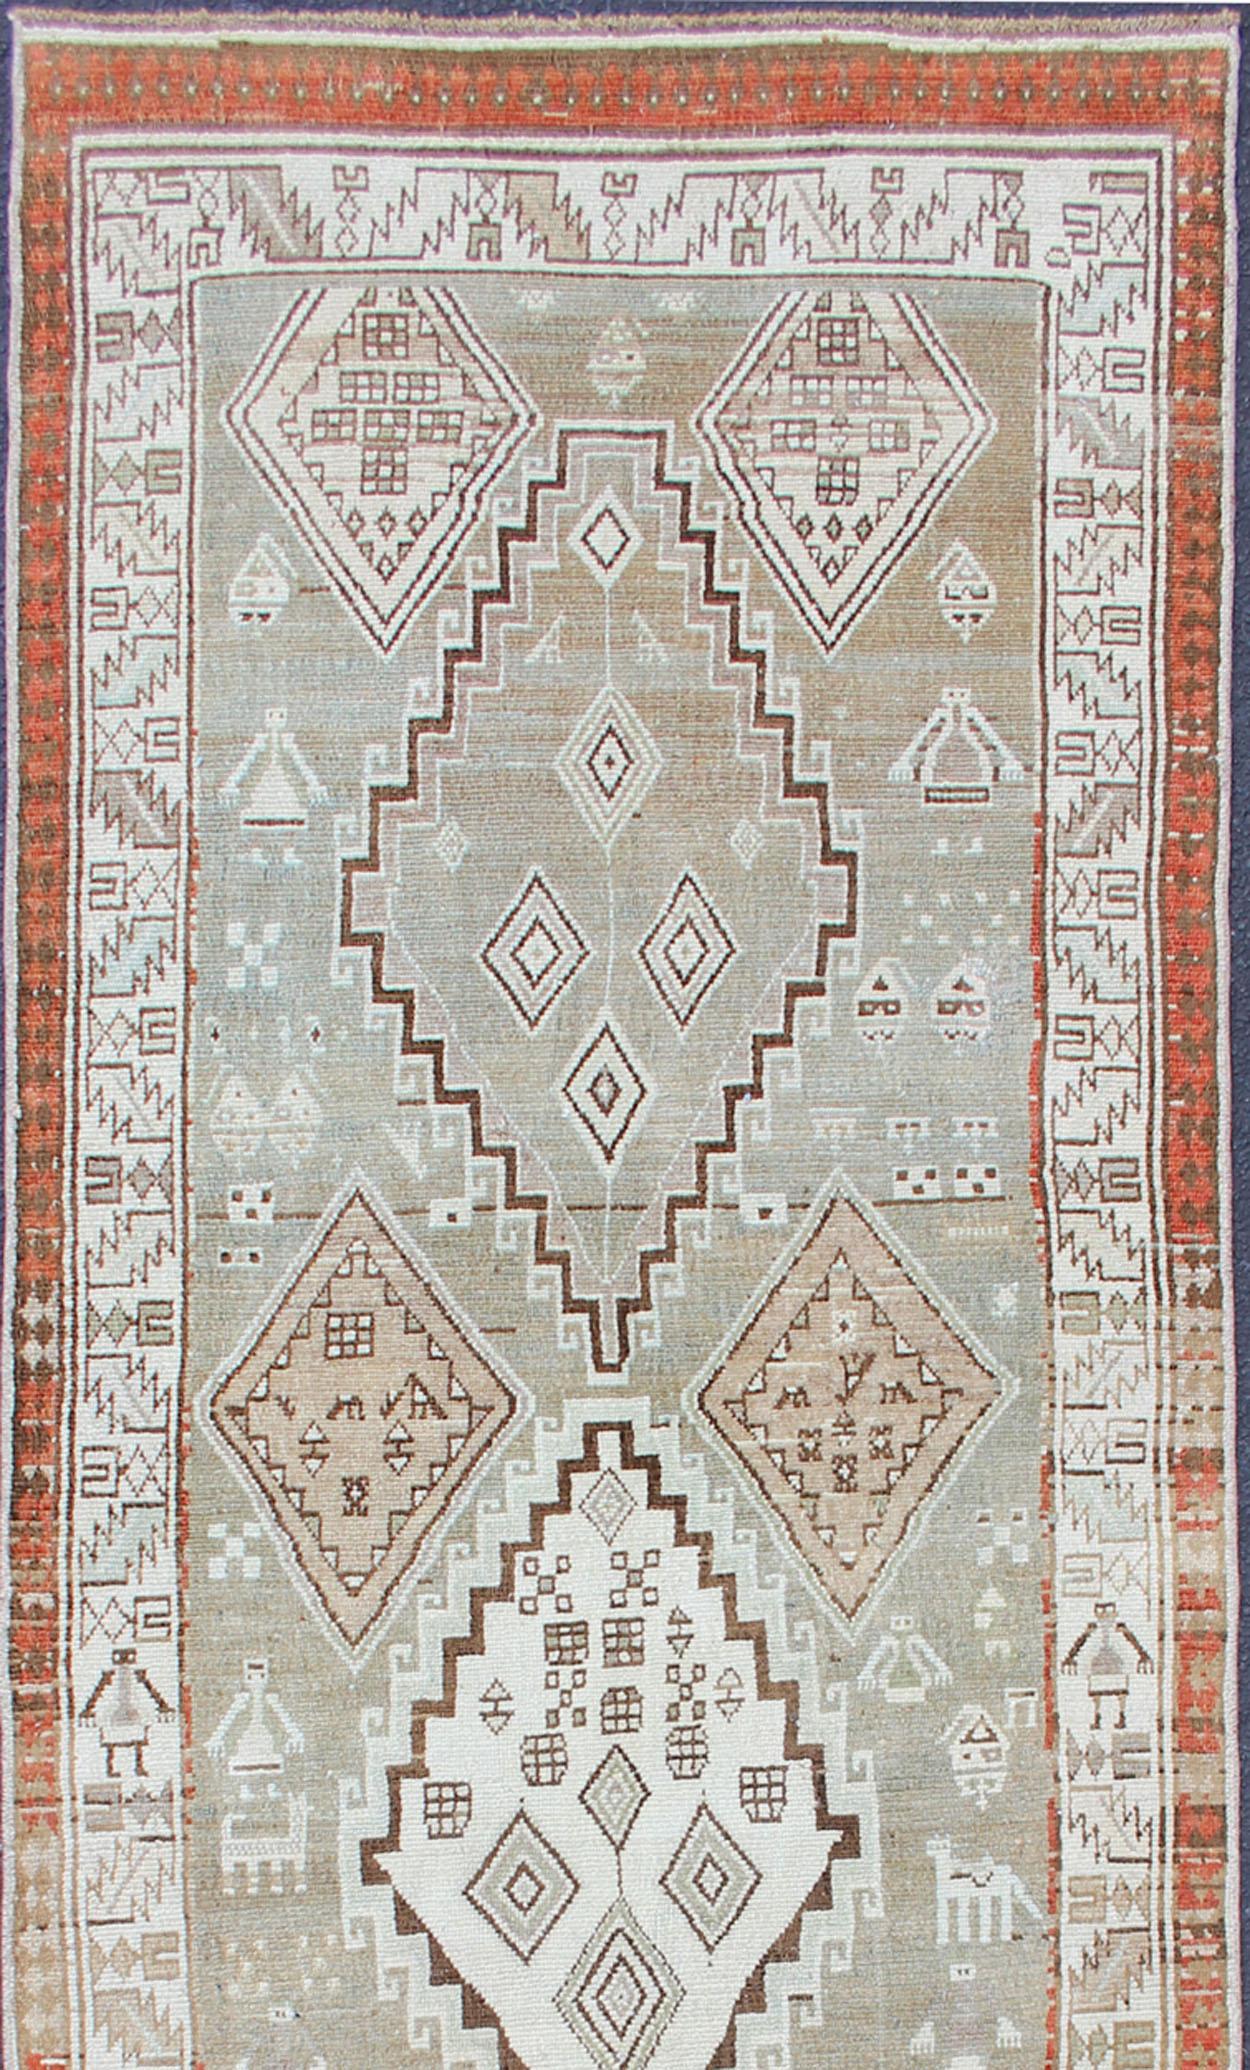 Antique Kurdish runner antique with tribal geometric medallions in soft green, brown, tape, salmon and orange-red border. rug SUS-2009-553, country of origin / type: Iran / Kurdish, circa 1900.
This Kurdish runner from early 20th century Persia is